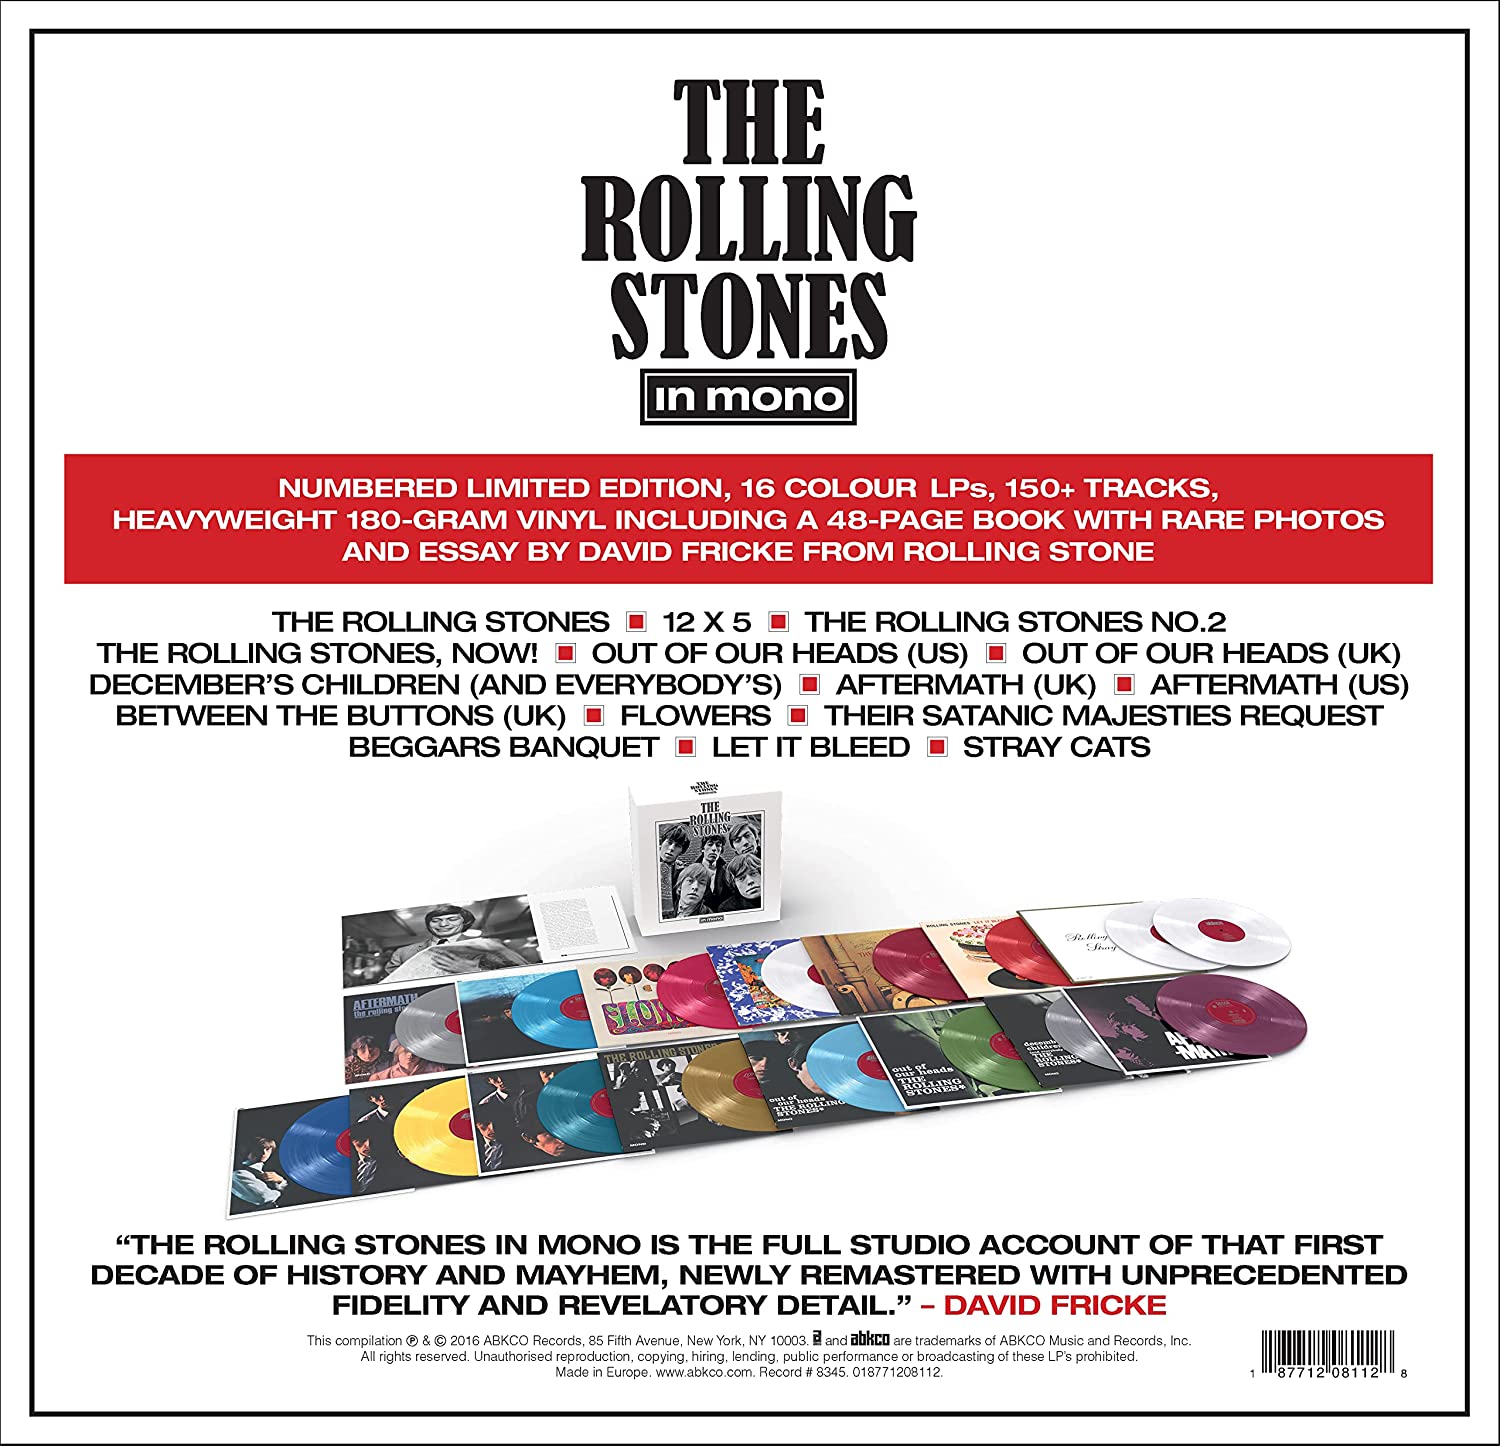 The Rolling Stones - The Rolling Stones In Mono [Colored Vinyl] [Box Set]